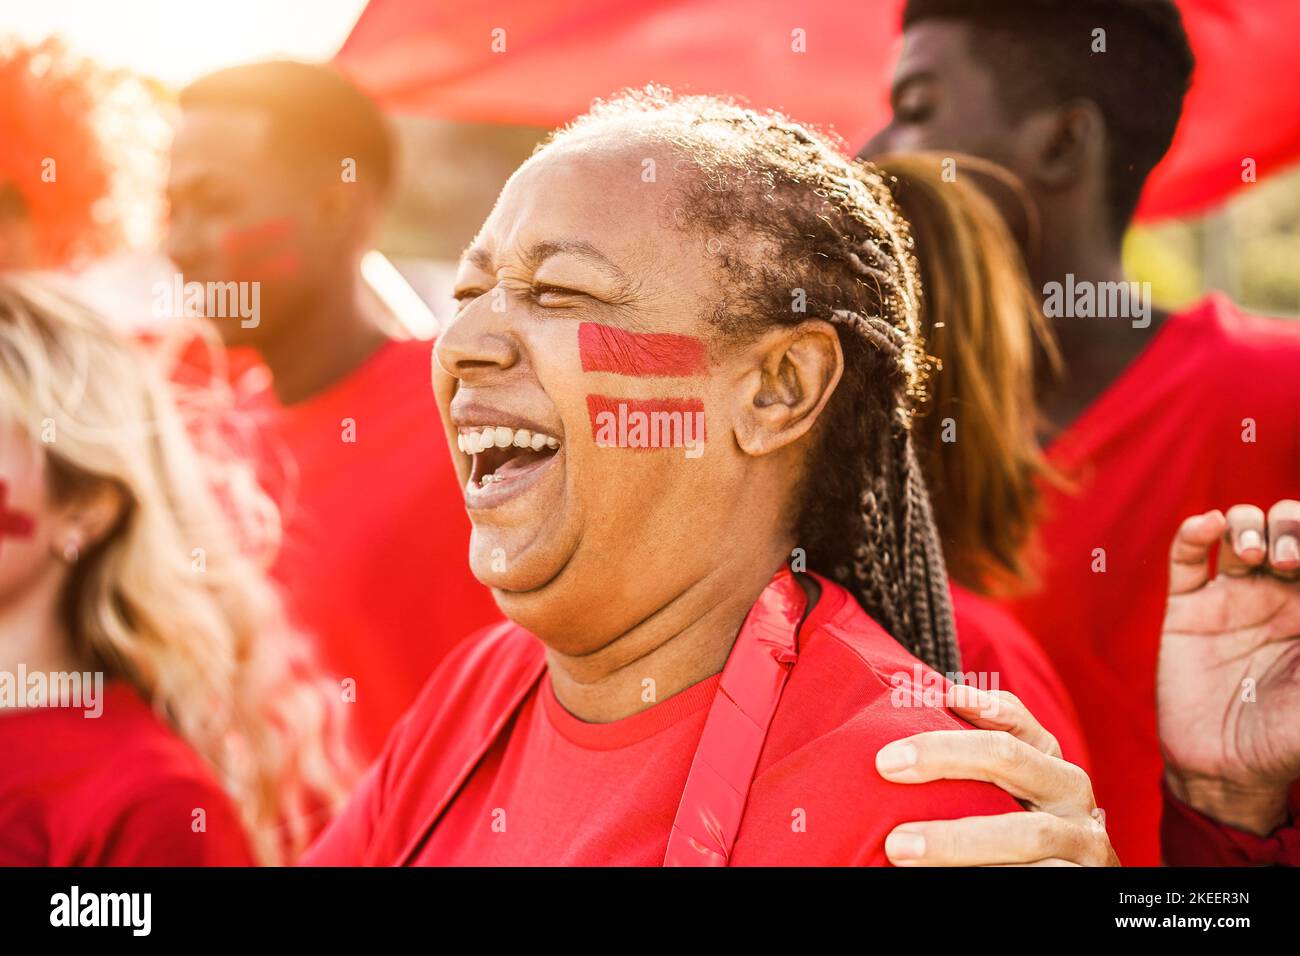 African red sport fans screaming while supporting their team - Football supporters having fun at competition event - Focus on senior woman face Stock Photo